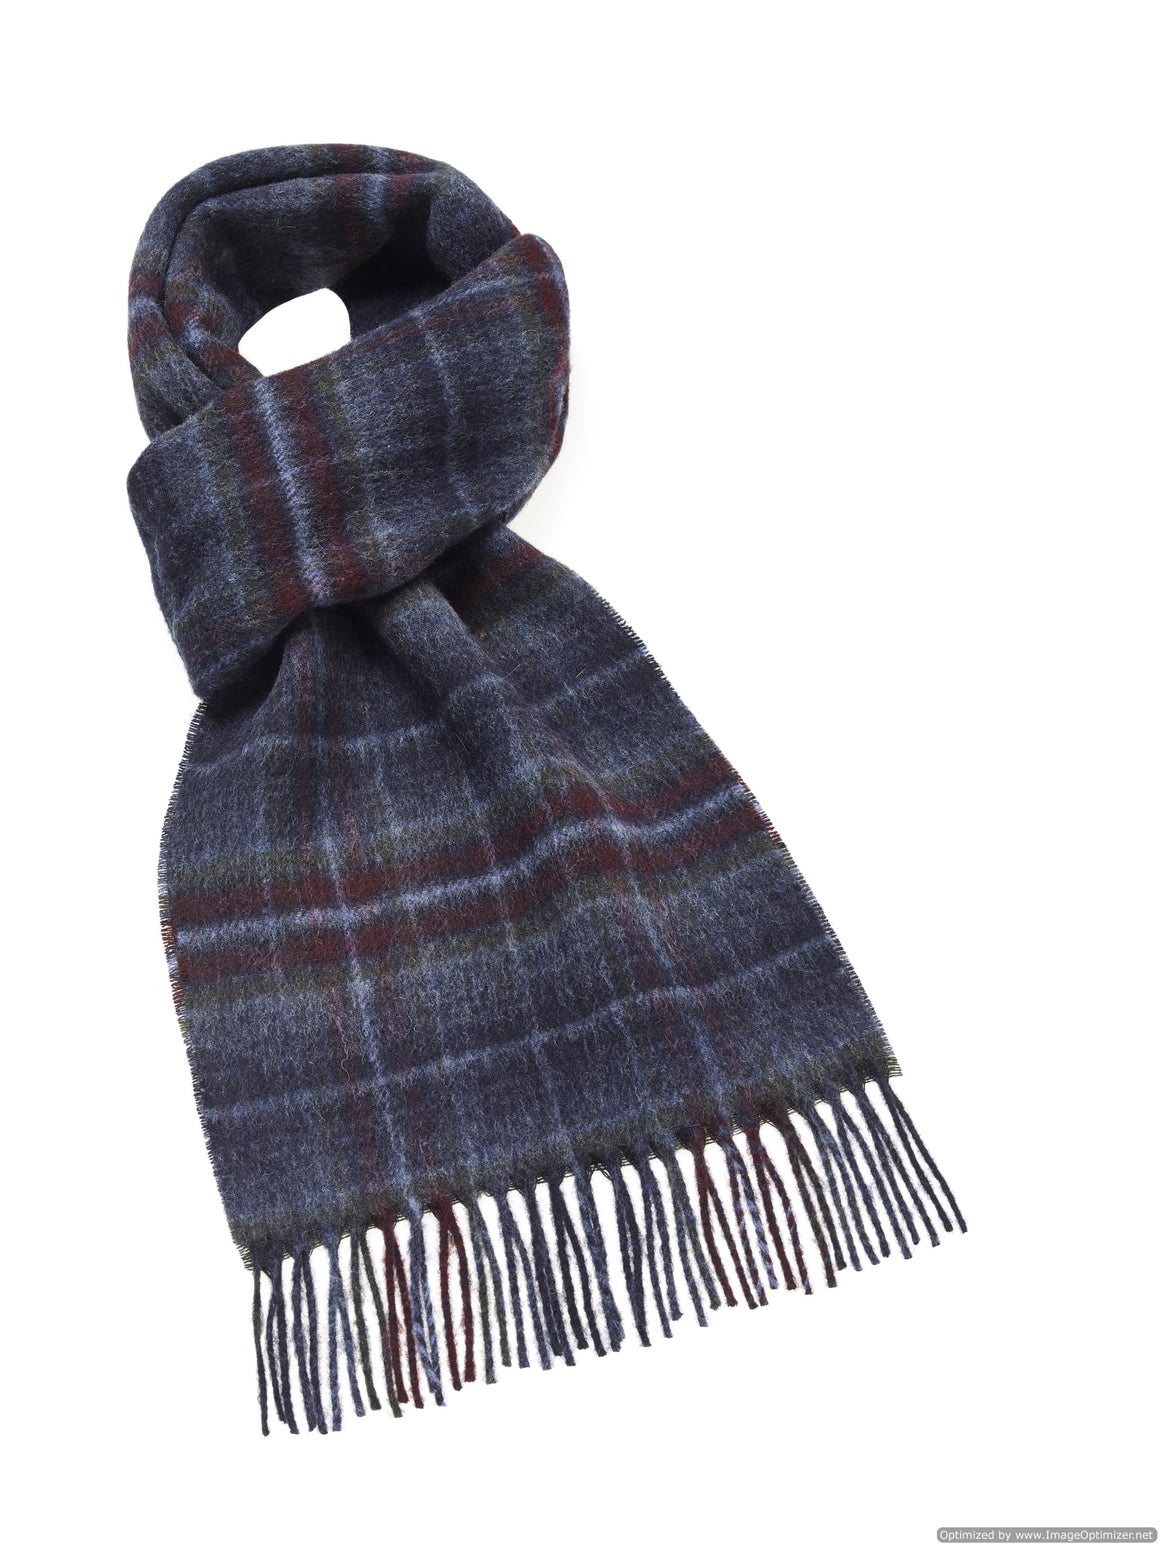 Ely Navy Scarf - Merino Lambswool - Made in England